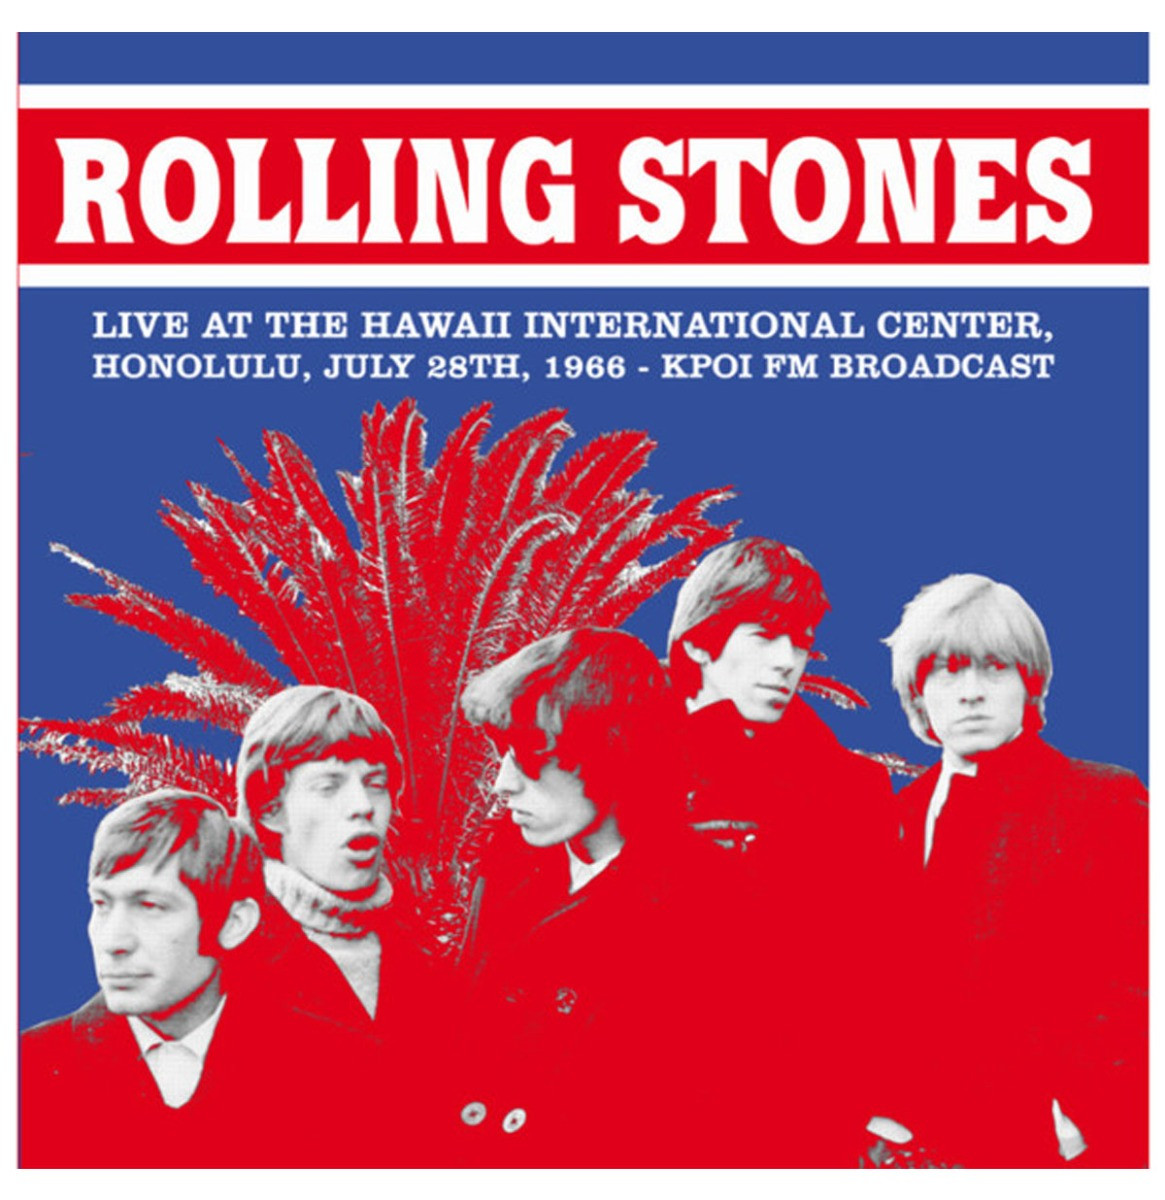 The Rolling Stones - Live At The Hawaii International Center, Honolulu, July 28 1966-KPOI FM Broadcast LP